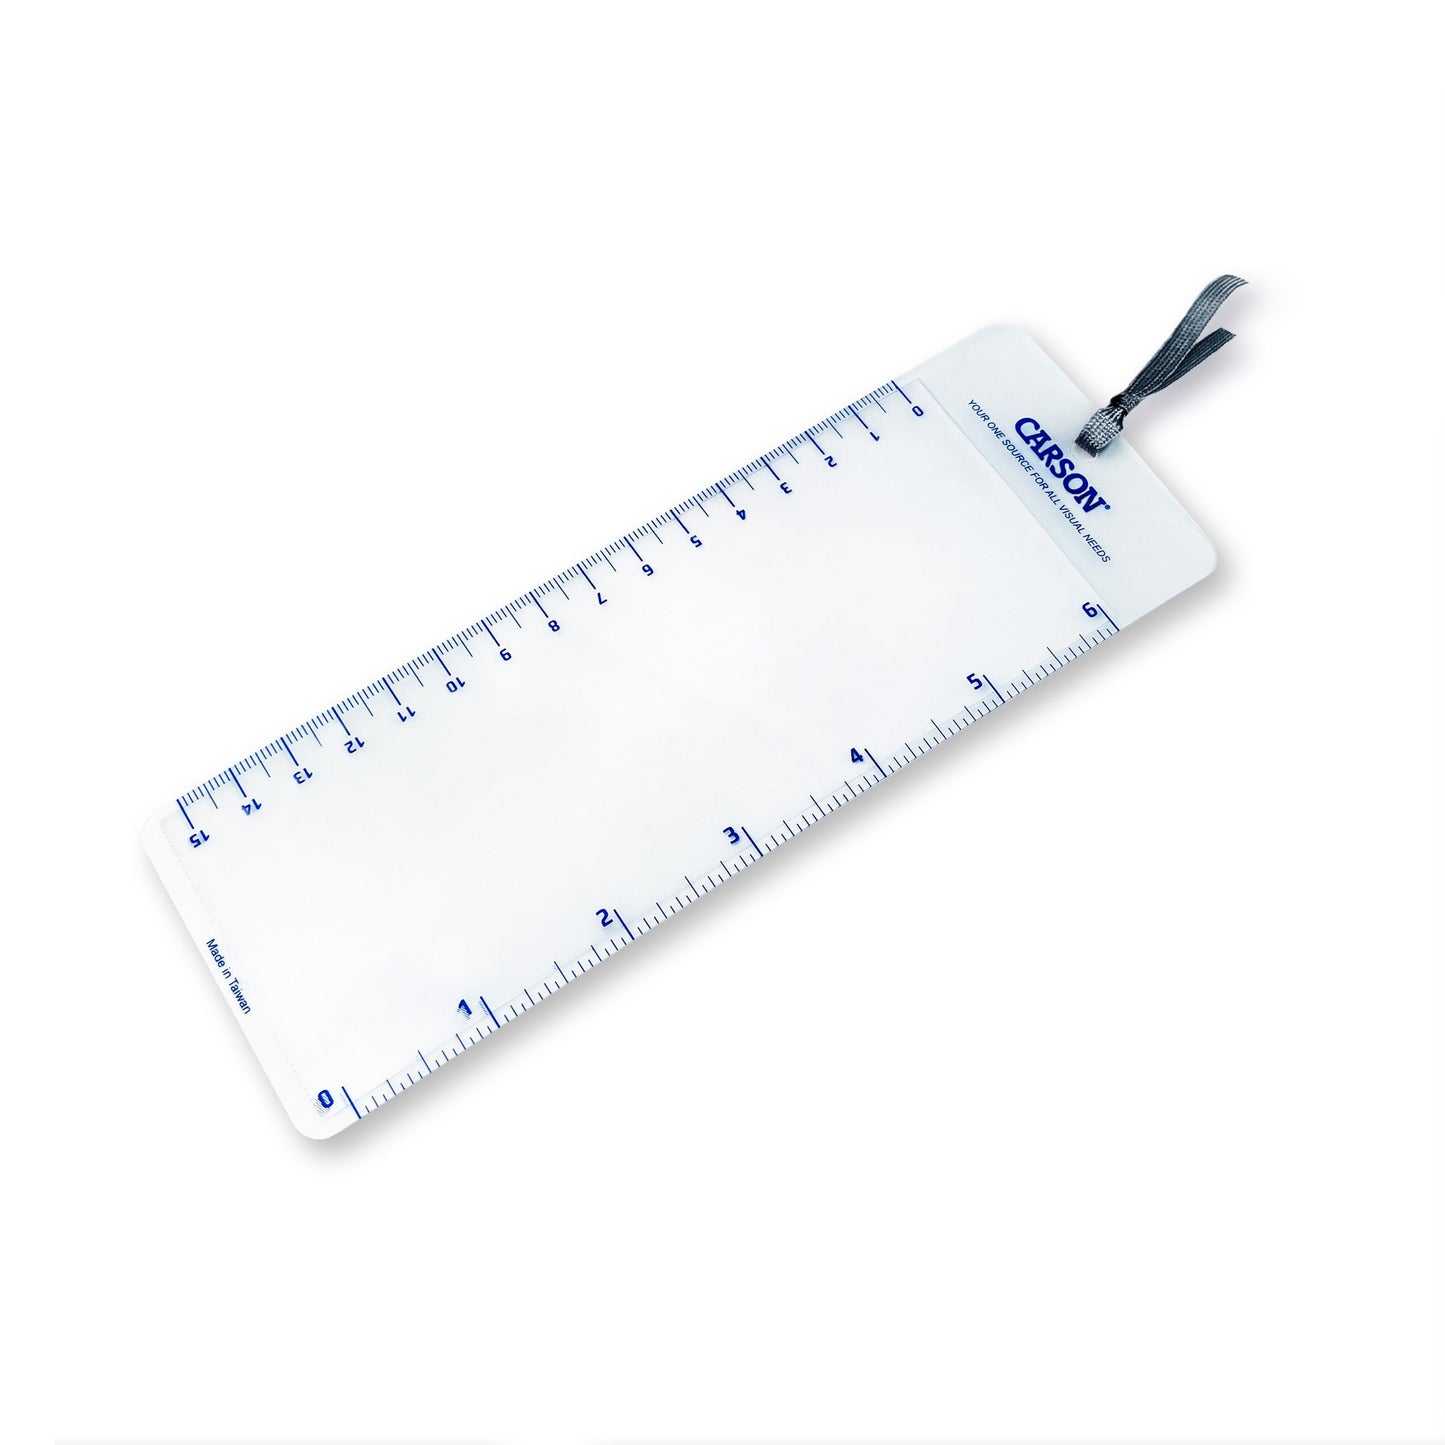 Carson MagniMark™ Fresnel 3x Power Page Magnifier with 6″ Ruler MM-22